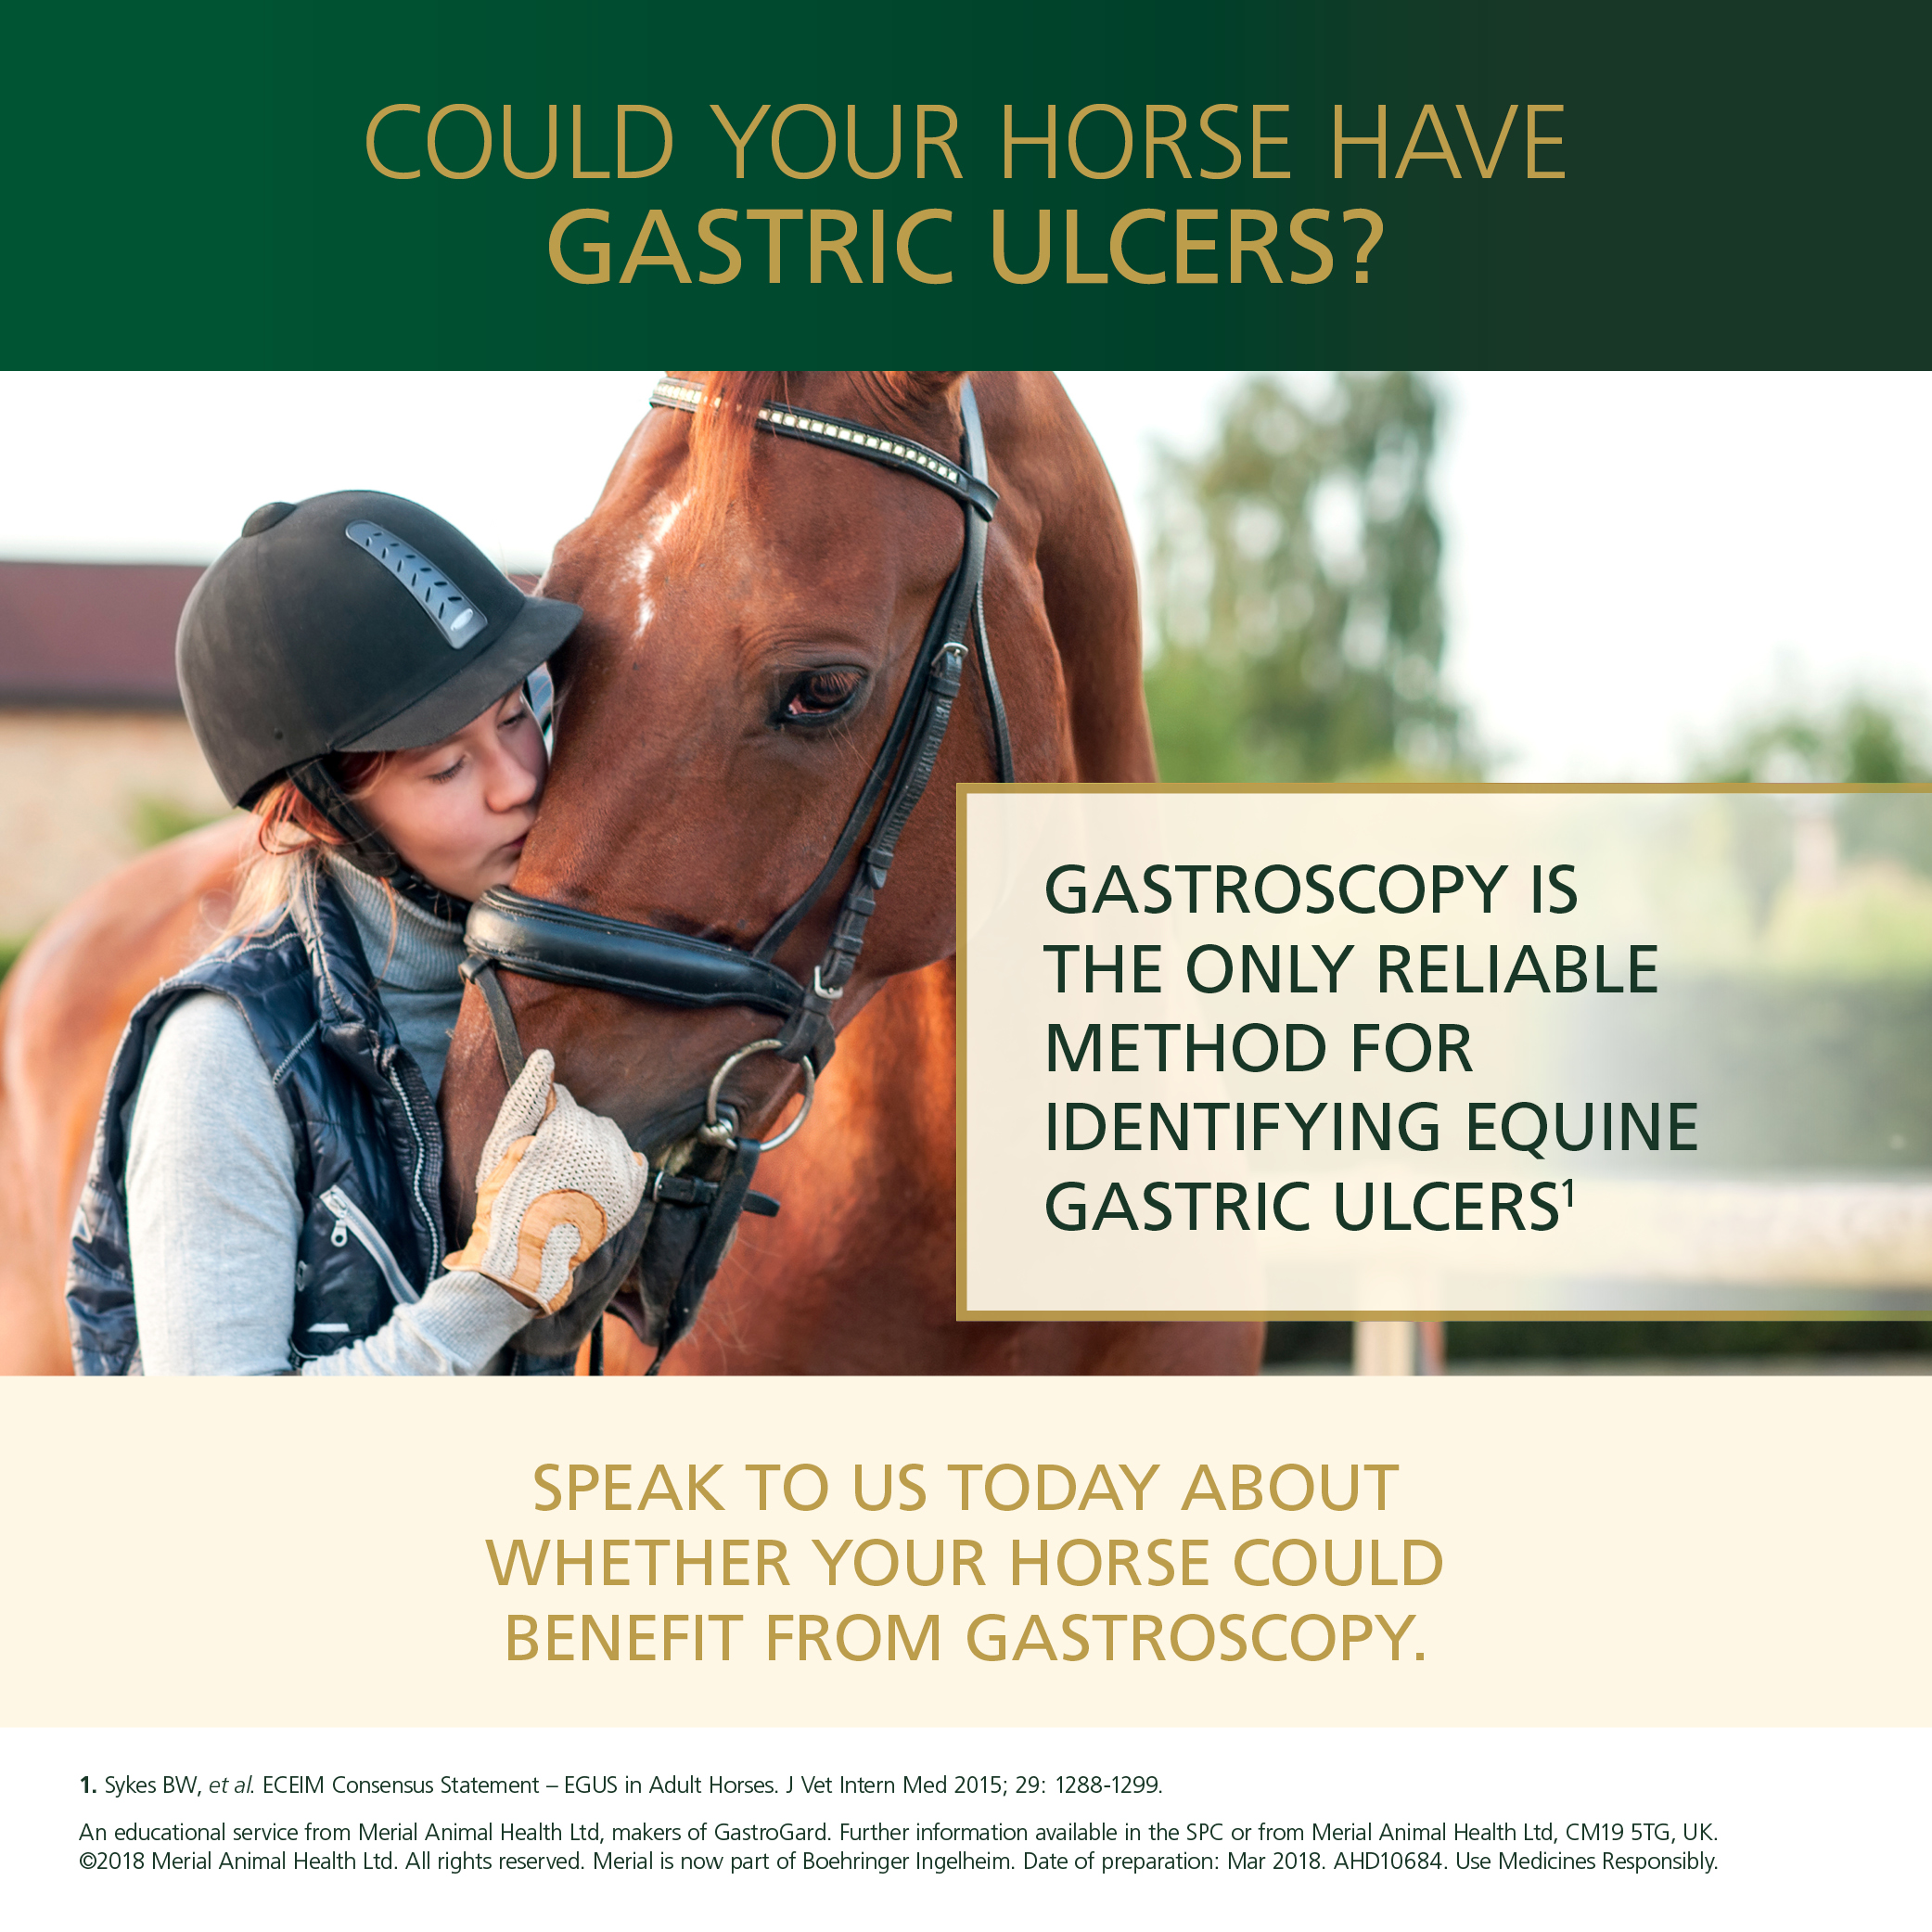 Equine Gastric Ulcers